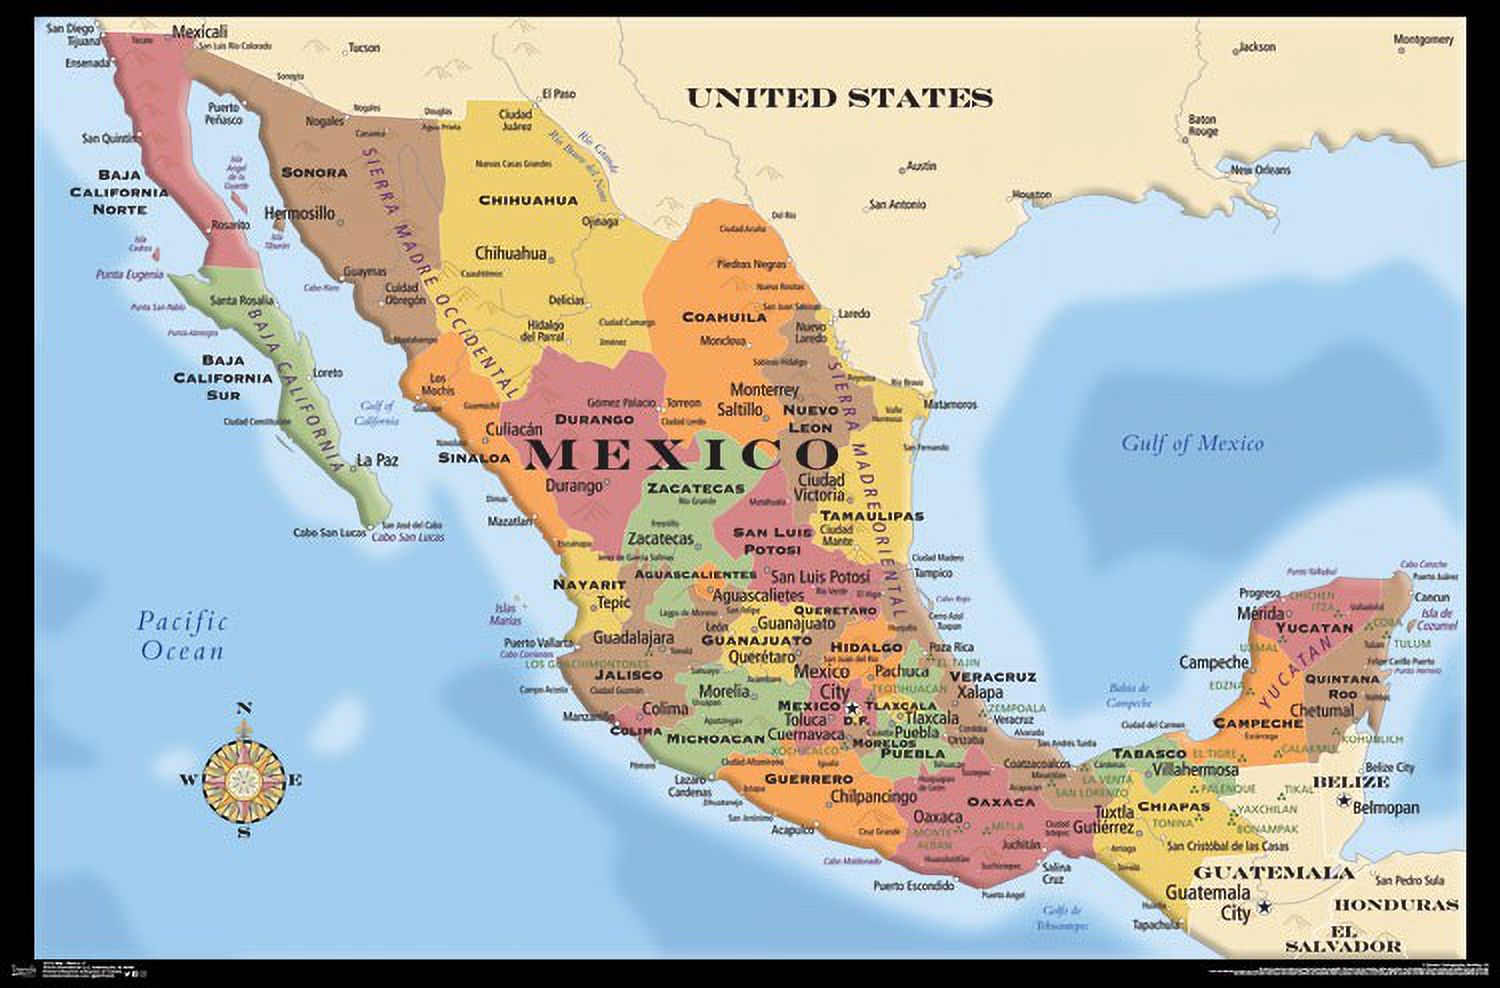 Map - Mexico Laminated Poster Print (34 x 22) - image 1 of 1